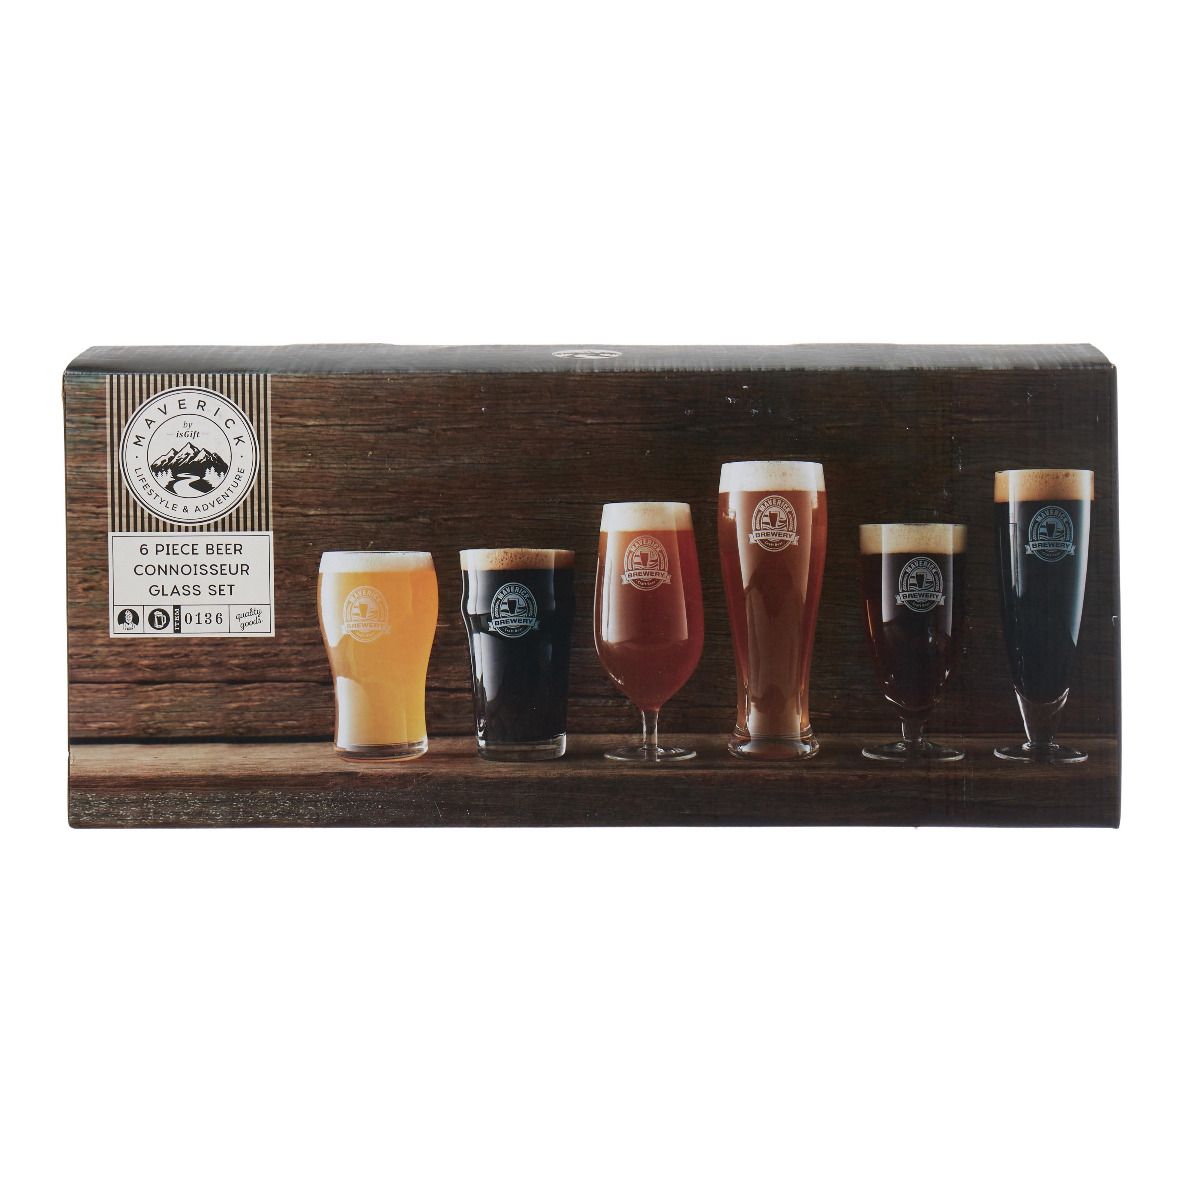 6PCE BEER CONNOISSEUR GLASS SET CLEAR